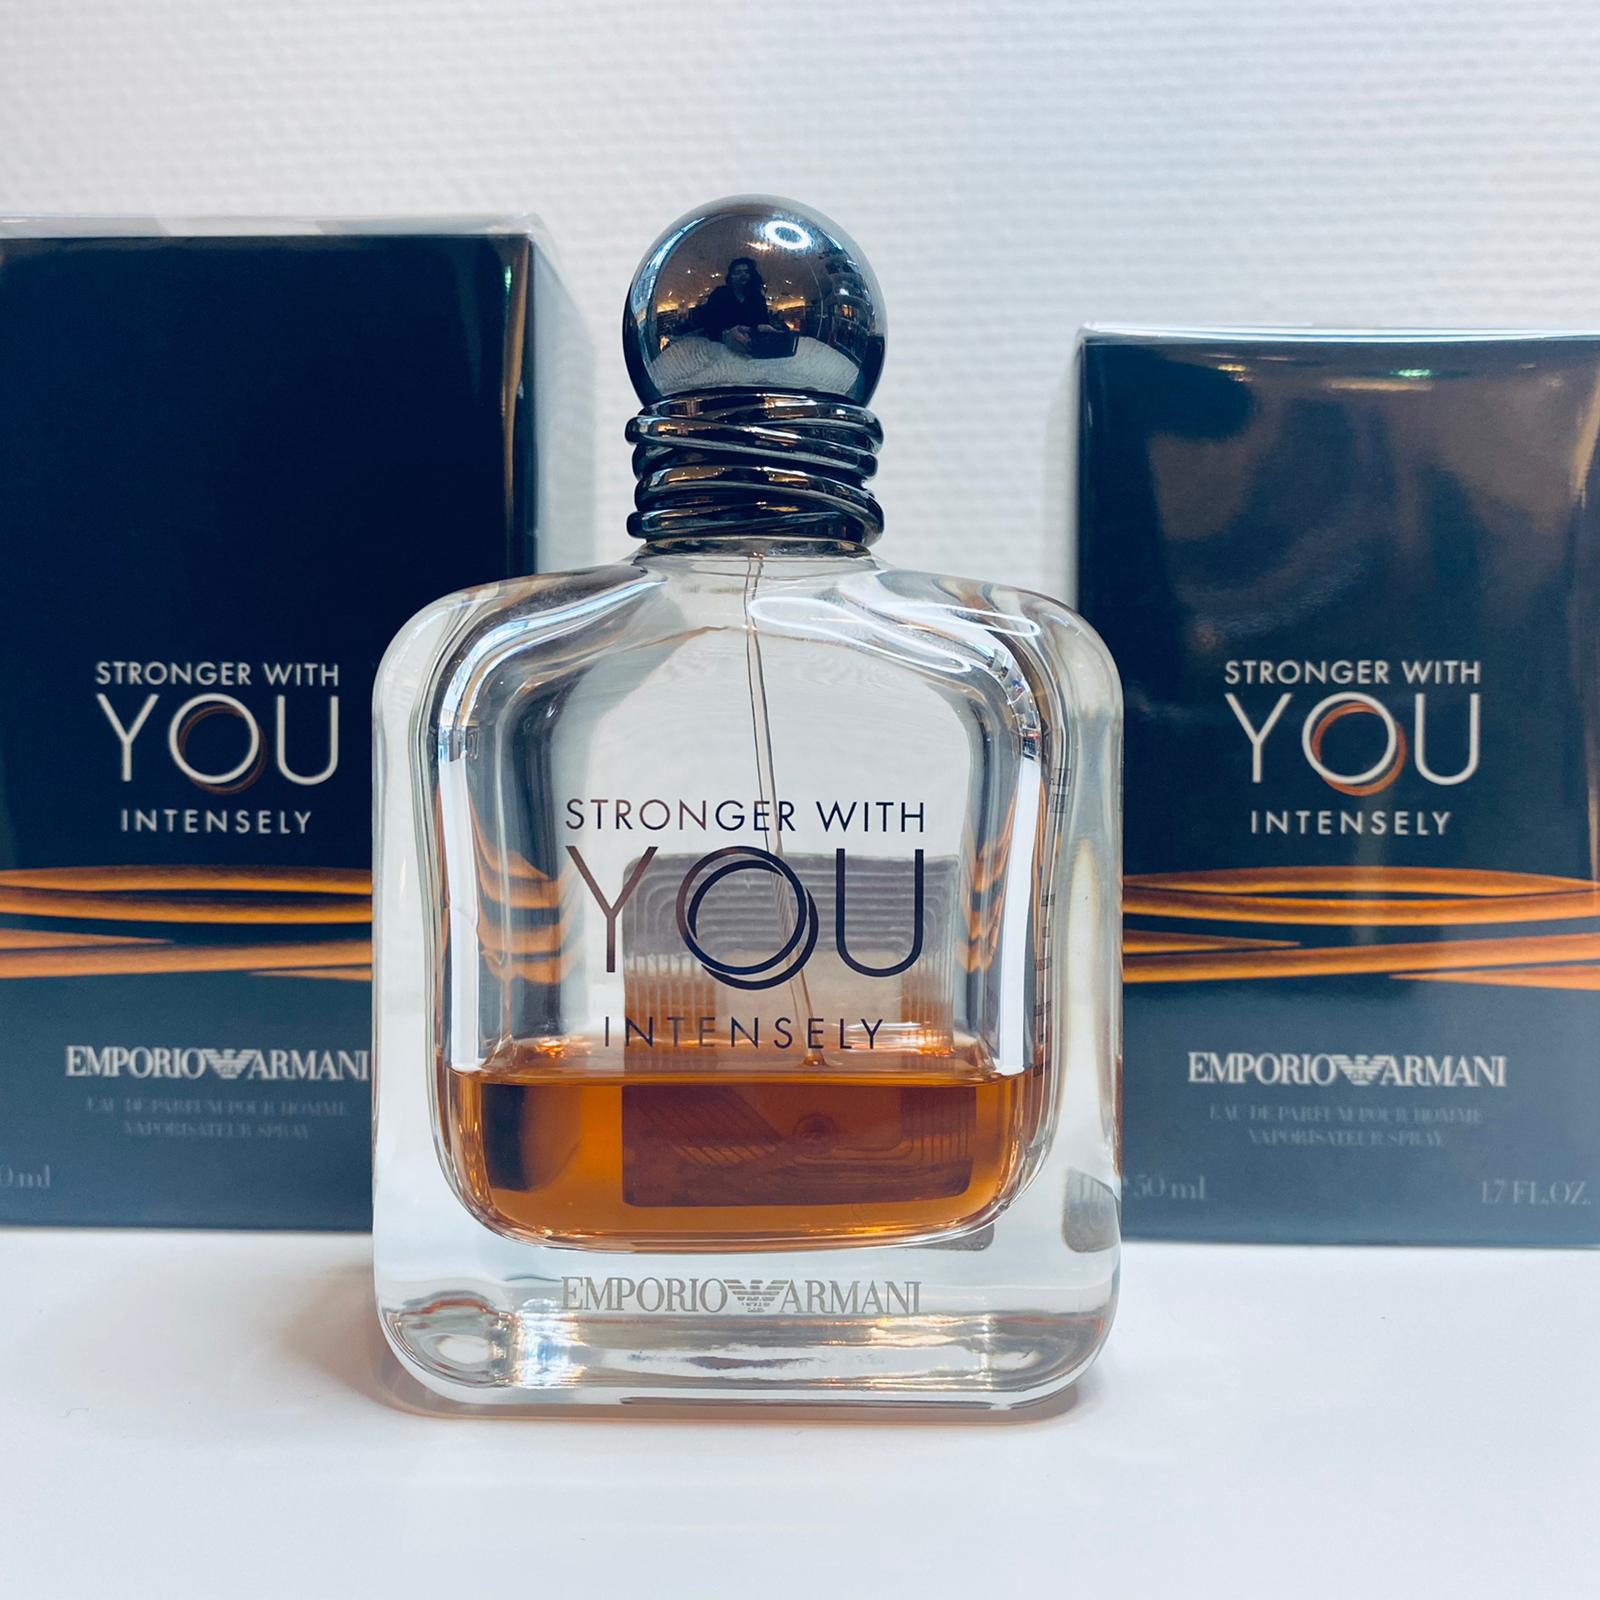 Emporio Armani Stronger with you Intensely 100 ml